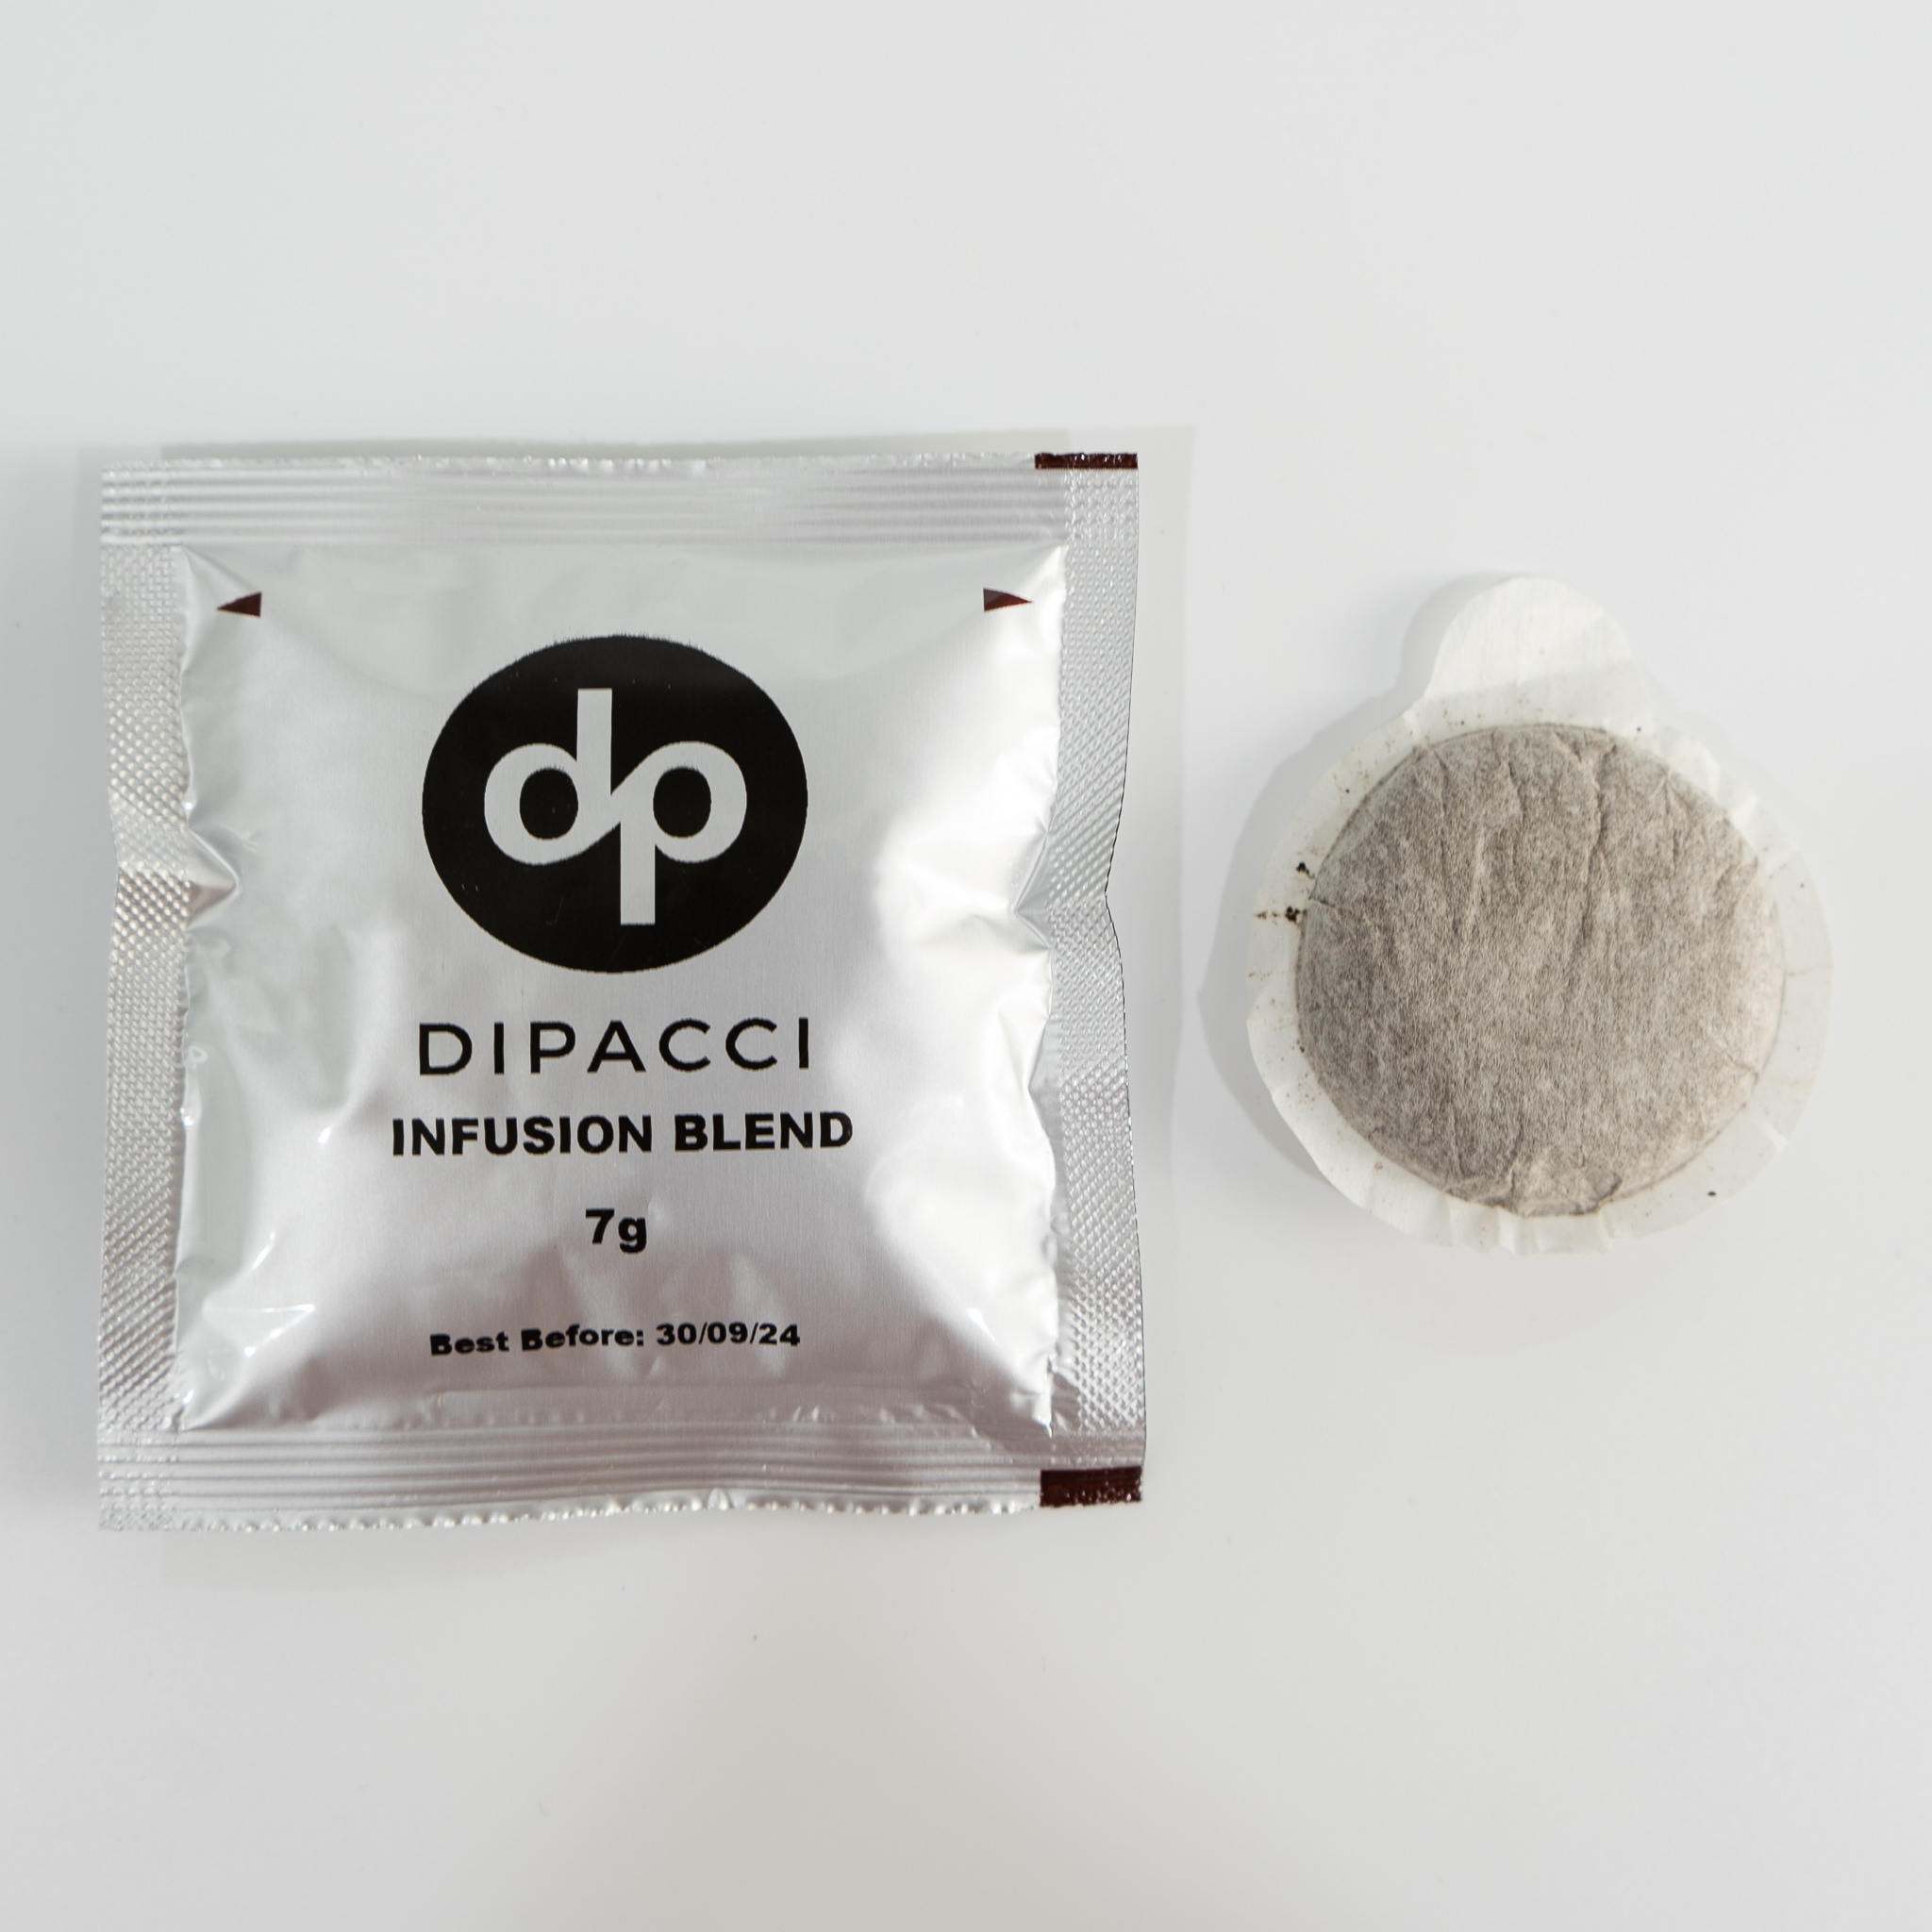 Dipacci Infusion Blend Coffee Pods - Infusion Blend